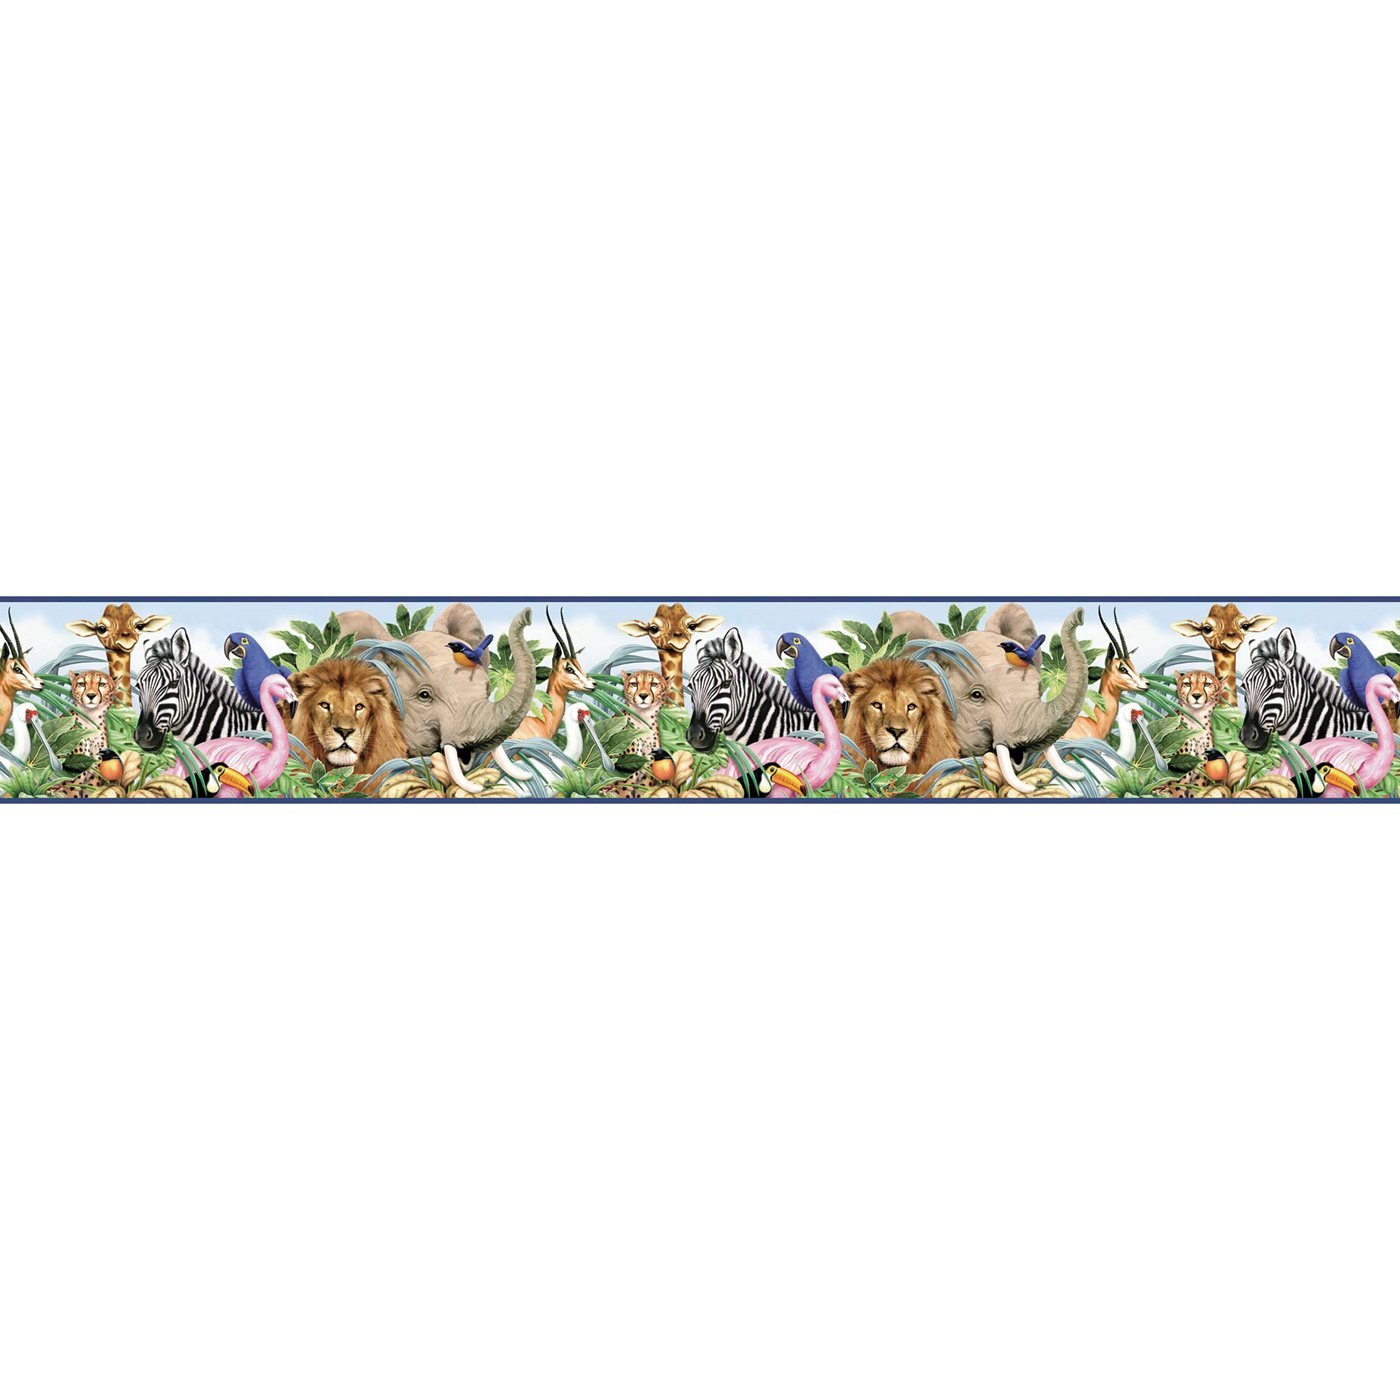  Freestyle Jungle Animals Pre Pasted Wallpaper Border ATG Stores 1400x1400